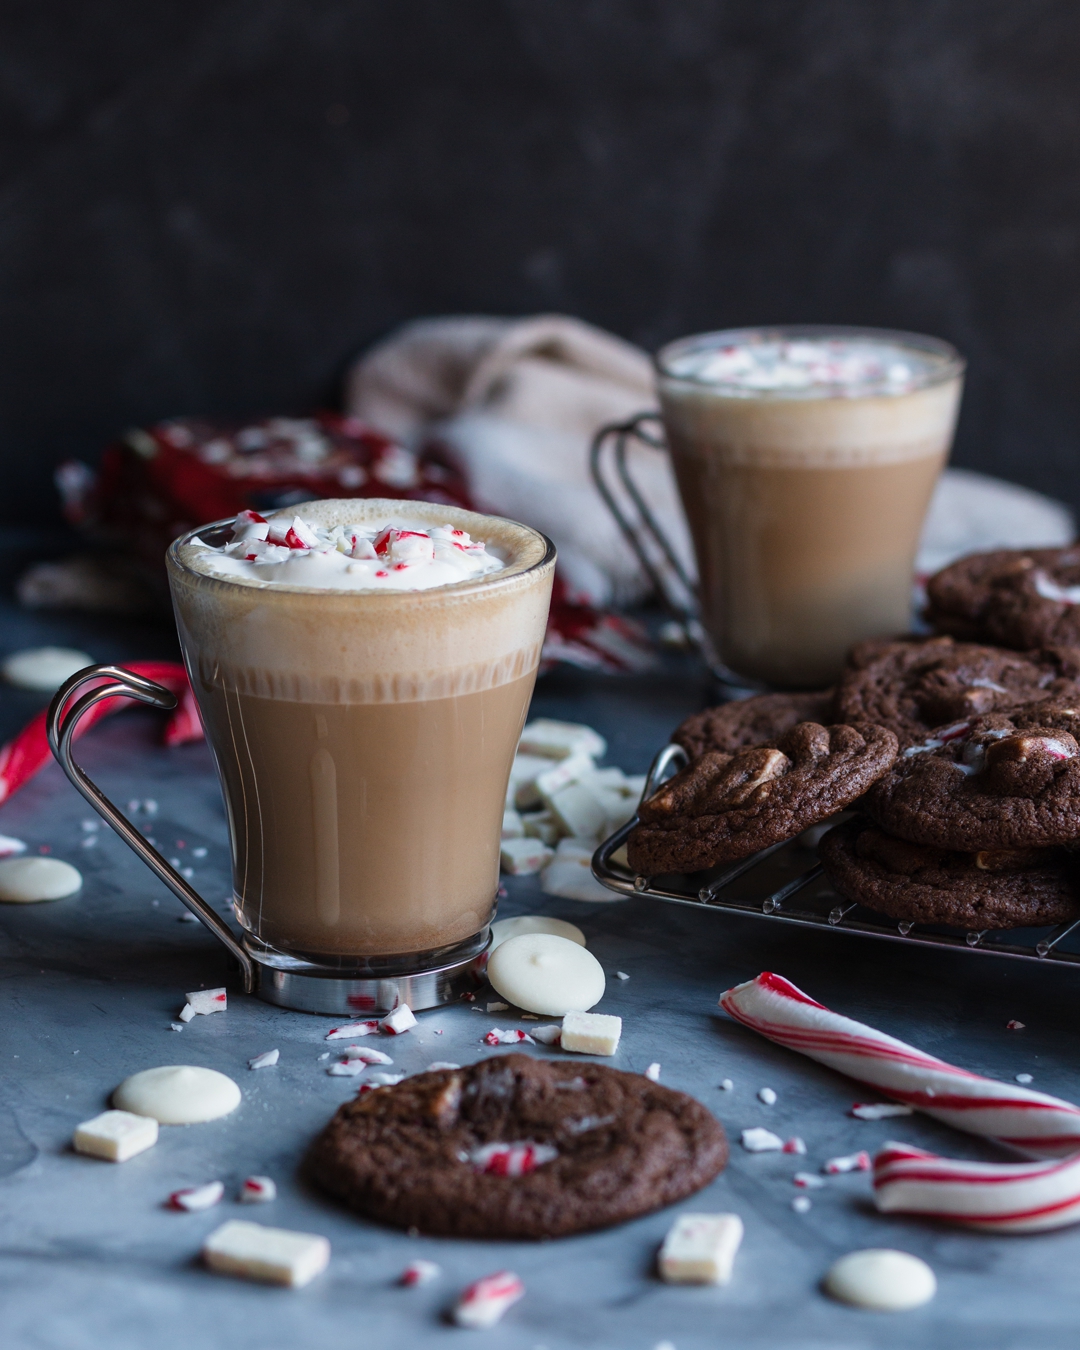 30 degree shot of a latte surrounded by cookies, candy canes, white chocolate, peppermint chips, and second latte.